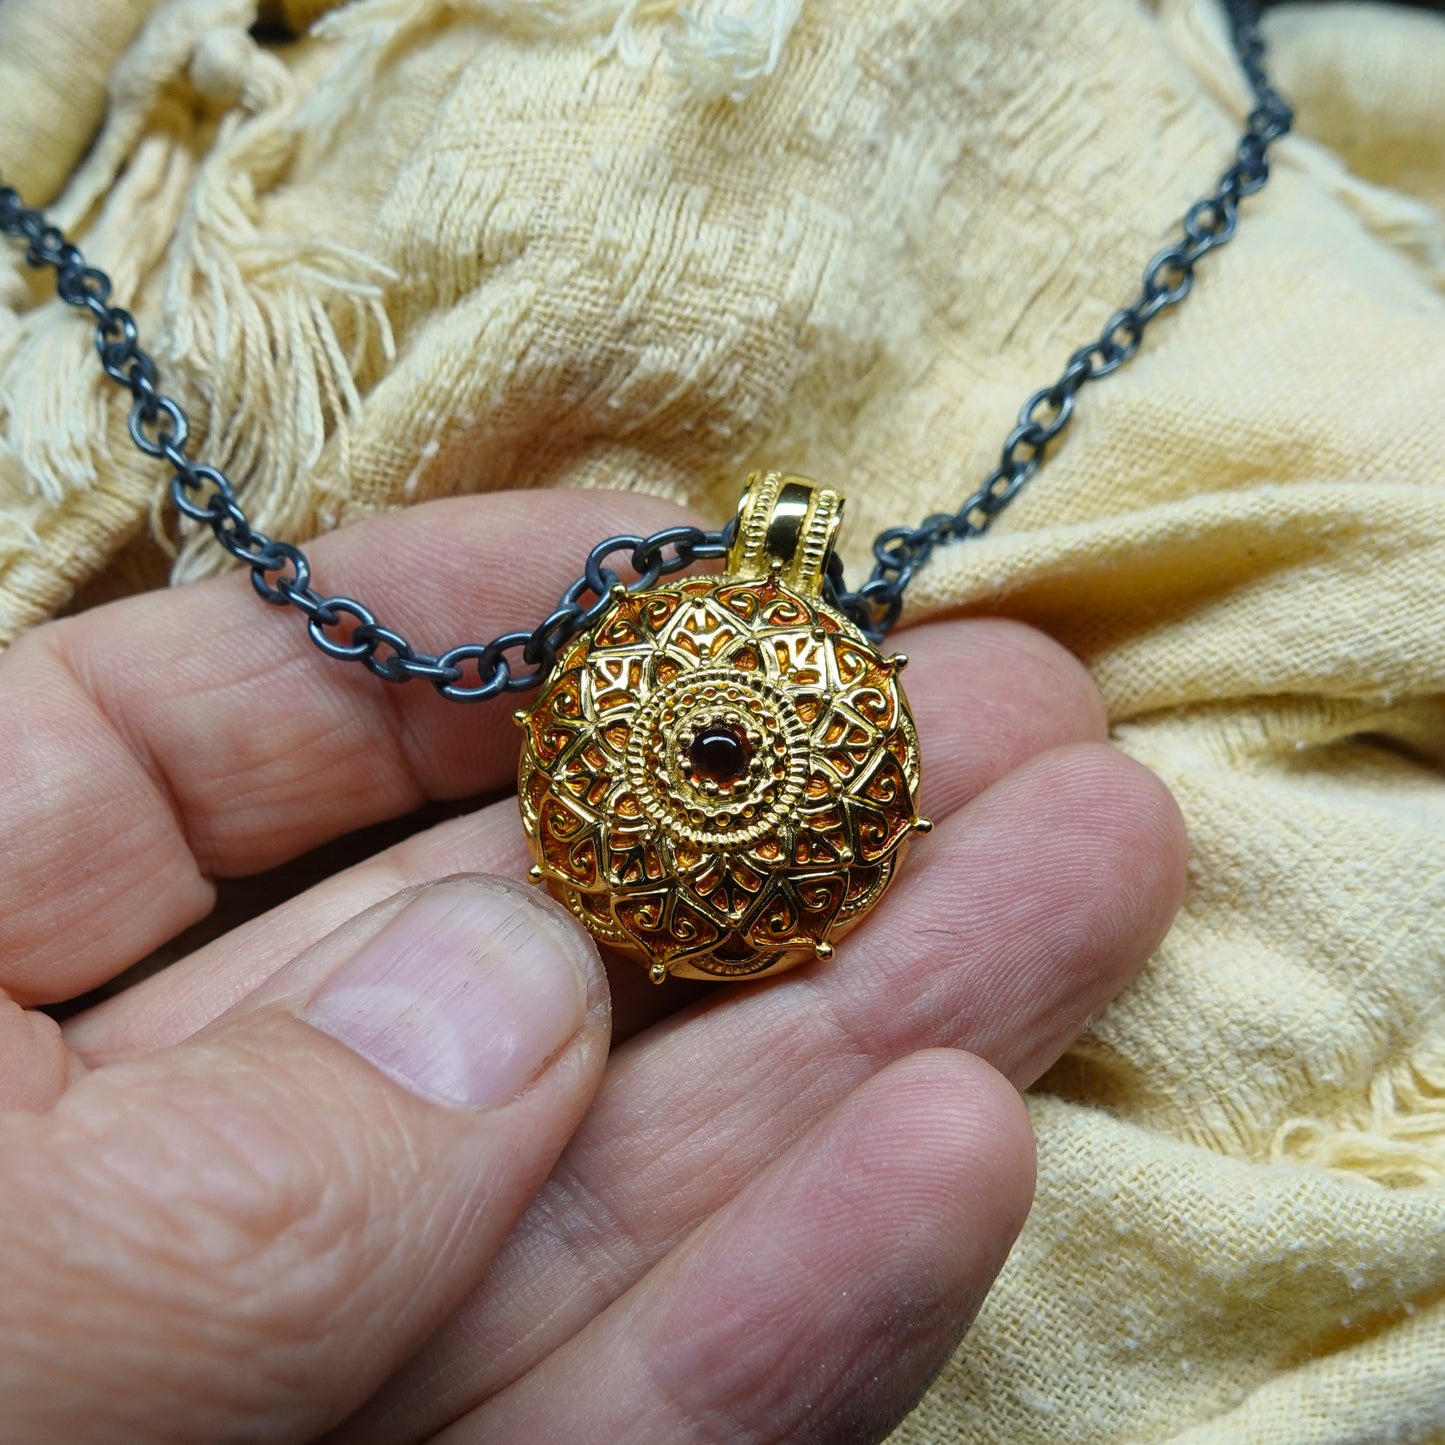 Gold mandala necklace. Solid gold meditation, yoga or mindfulness amulet on a blackened silver chain. *This piece is finished and ready to be shipped*